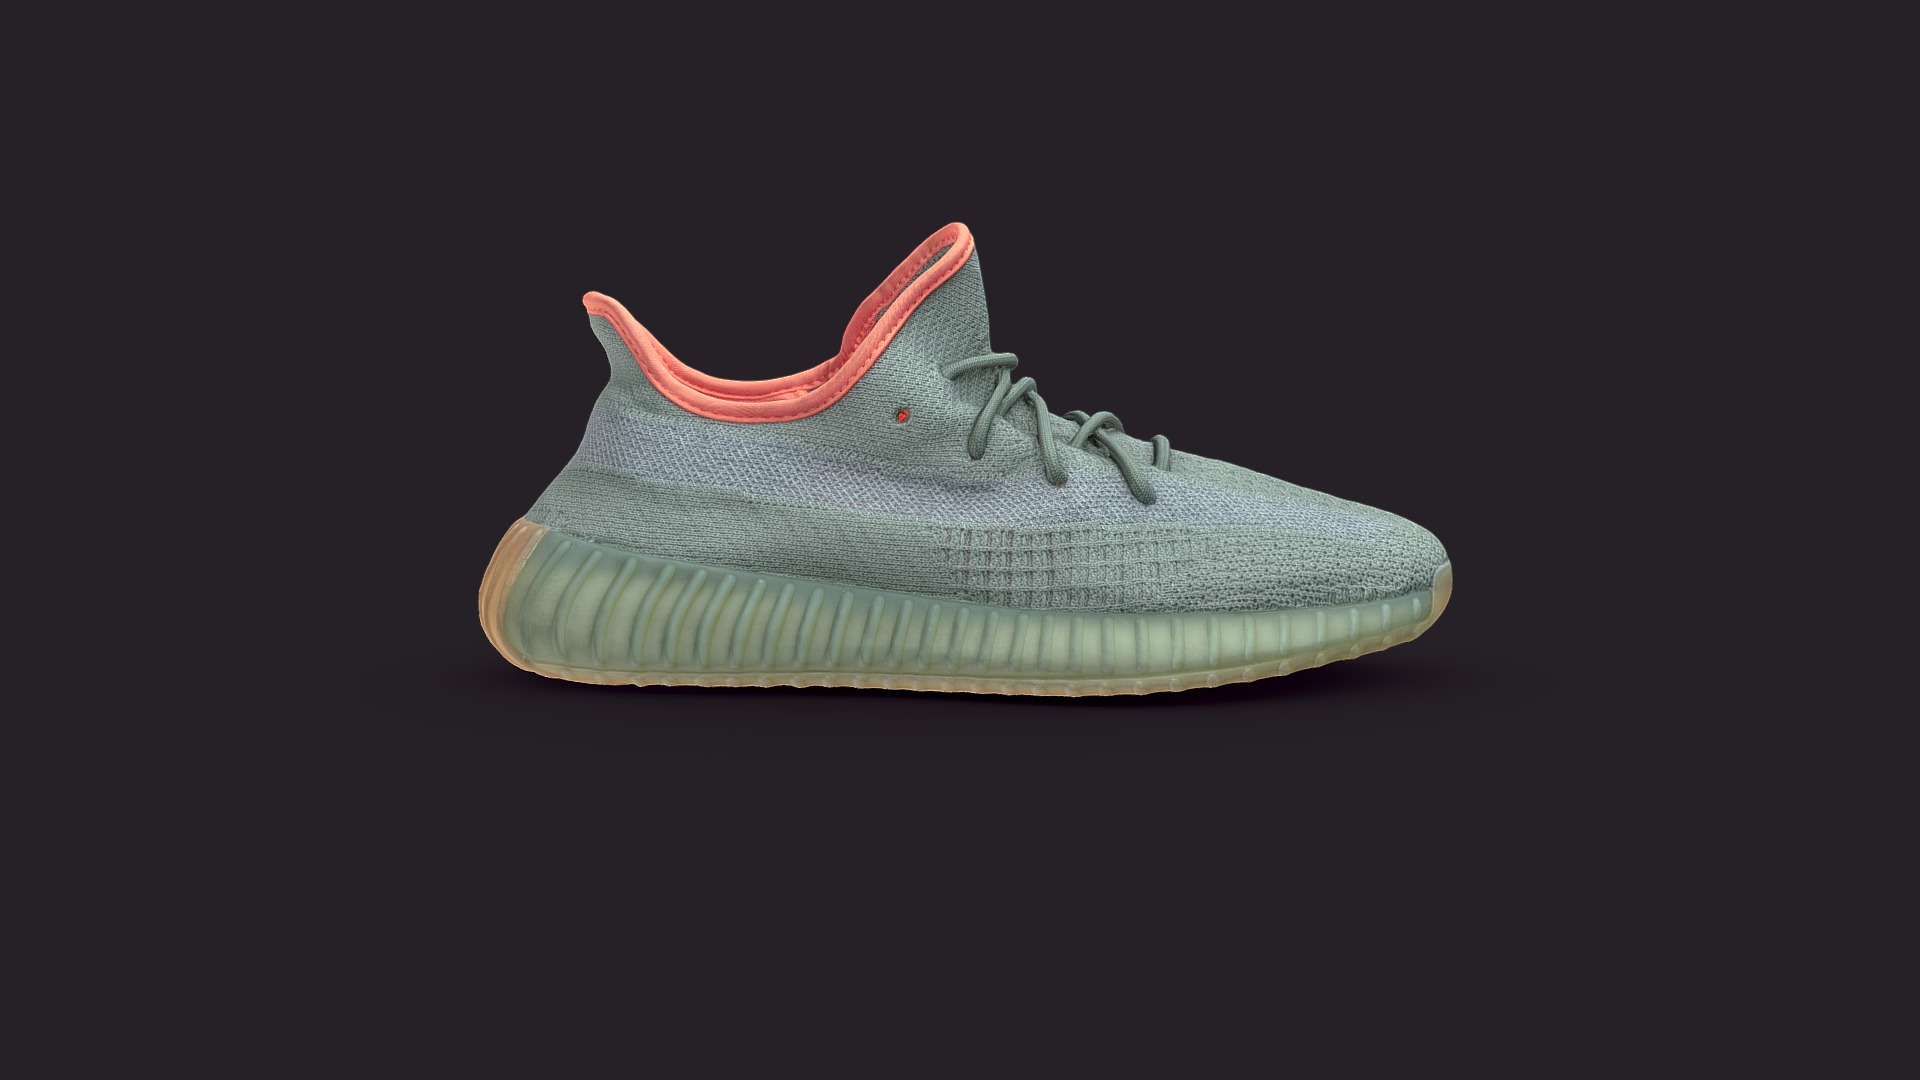 3D model Adidas Yeezy Boost 350 V2 Desert Sage - This is a 3D model of the Adidas Yeezy Boost 350 V2 Desert Sage. The 3D model is about a shoe on a green surface.